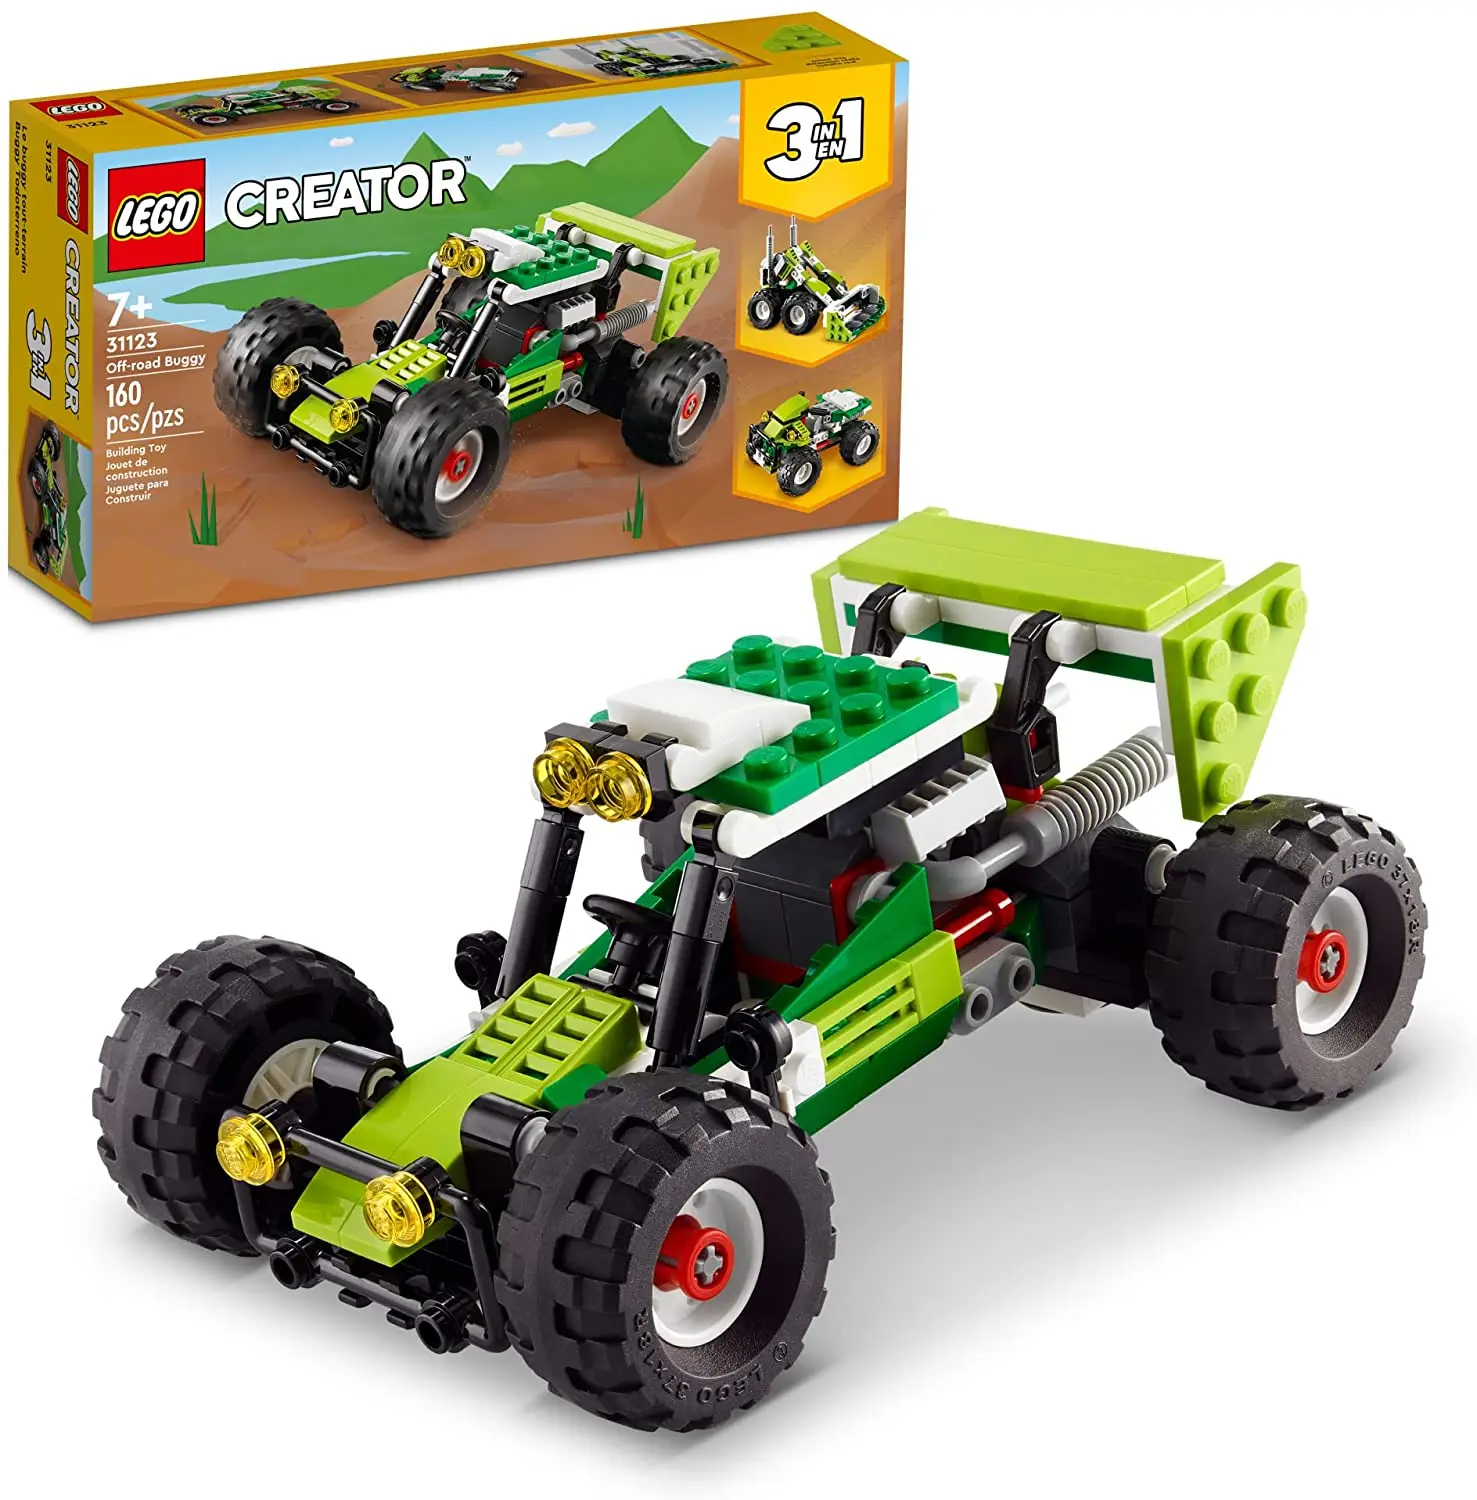 

LEGO Creator 3 in1 Off-Road Buggy 31123 Building Kit; build a Buggy is Toy and Rebuild It into a Skid Loader or ATV